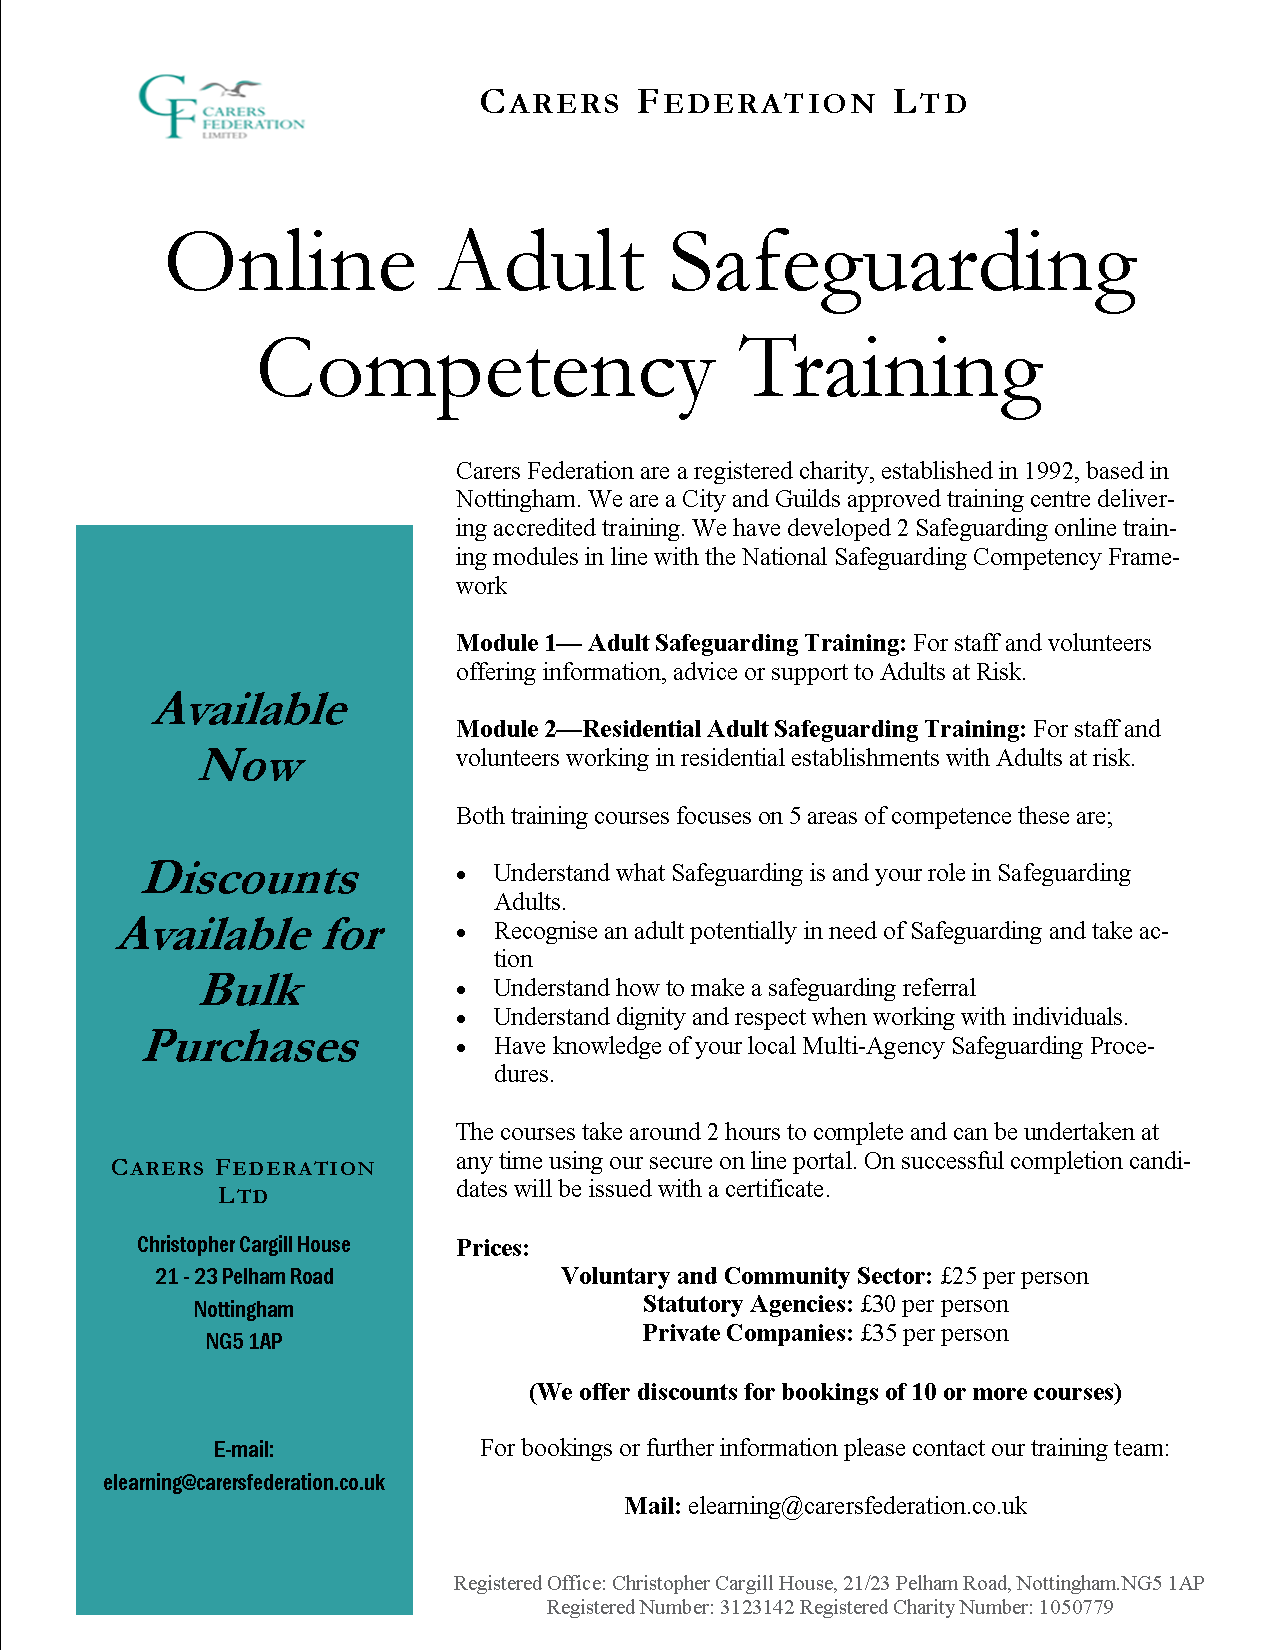 Attachment Safeguarding Training  flyer Feb 2019.png